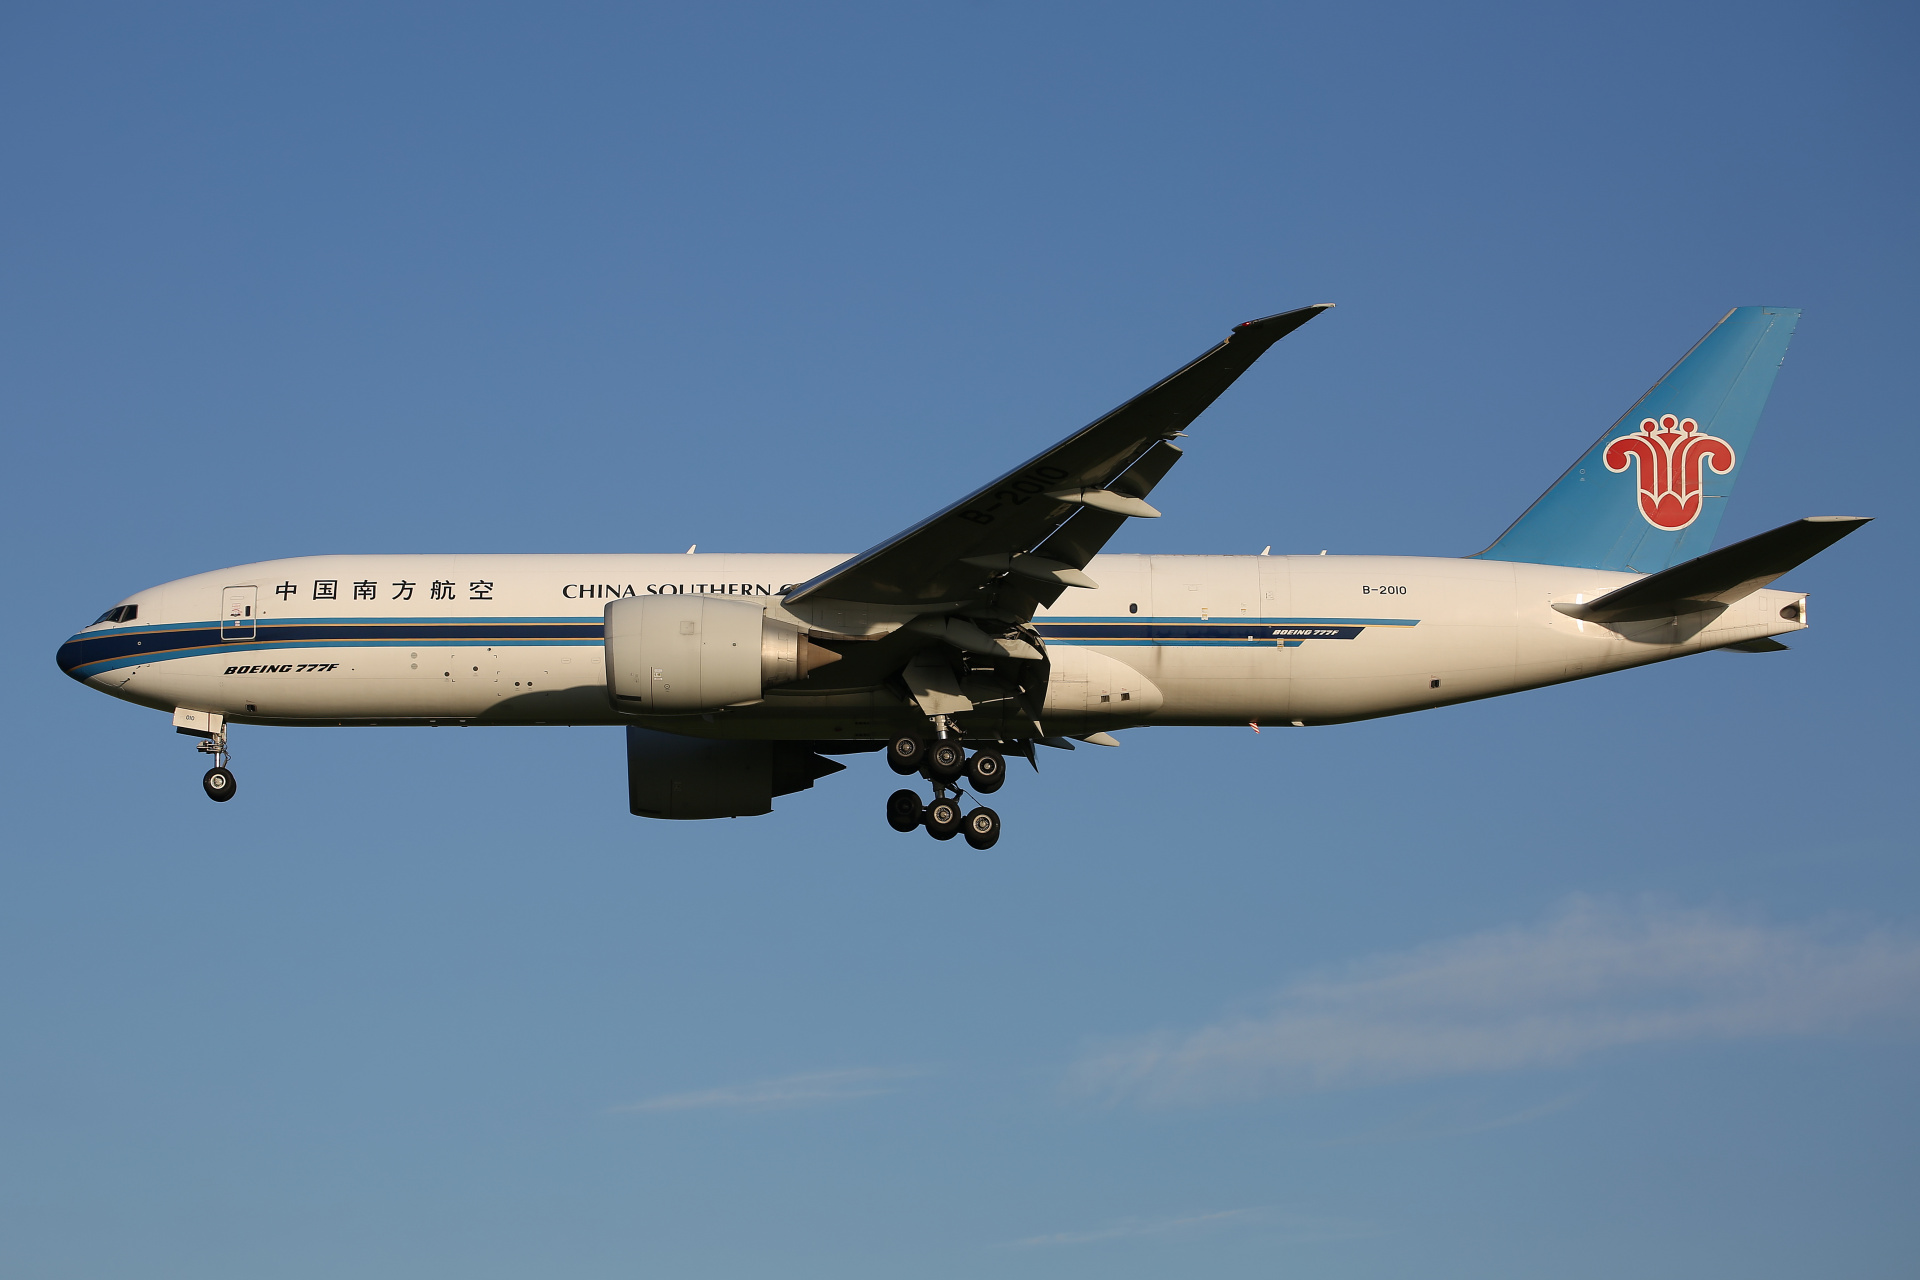 B-2010 (Aircraft » Schiphol Spotting » Boeing 777F » China Southern Cargo)